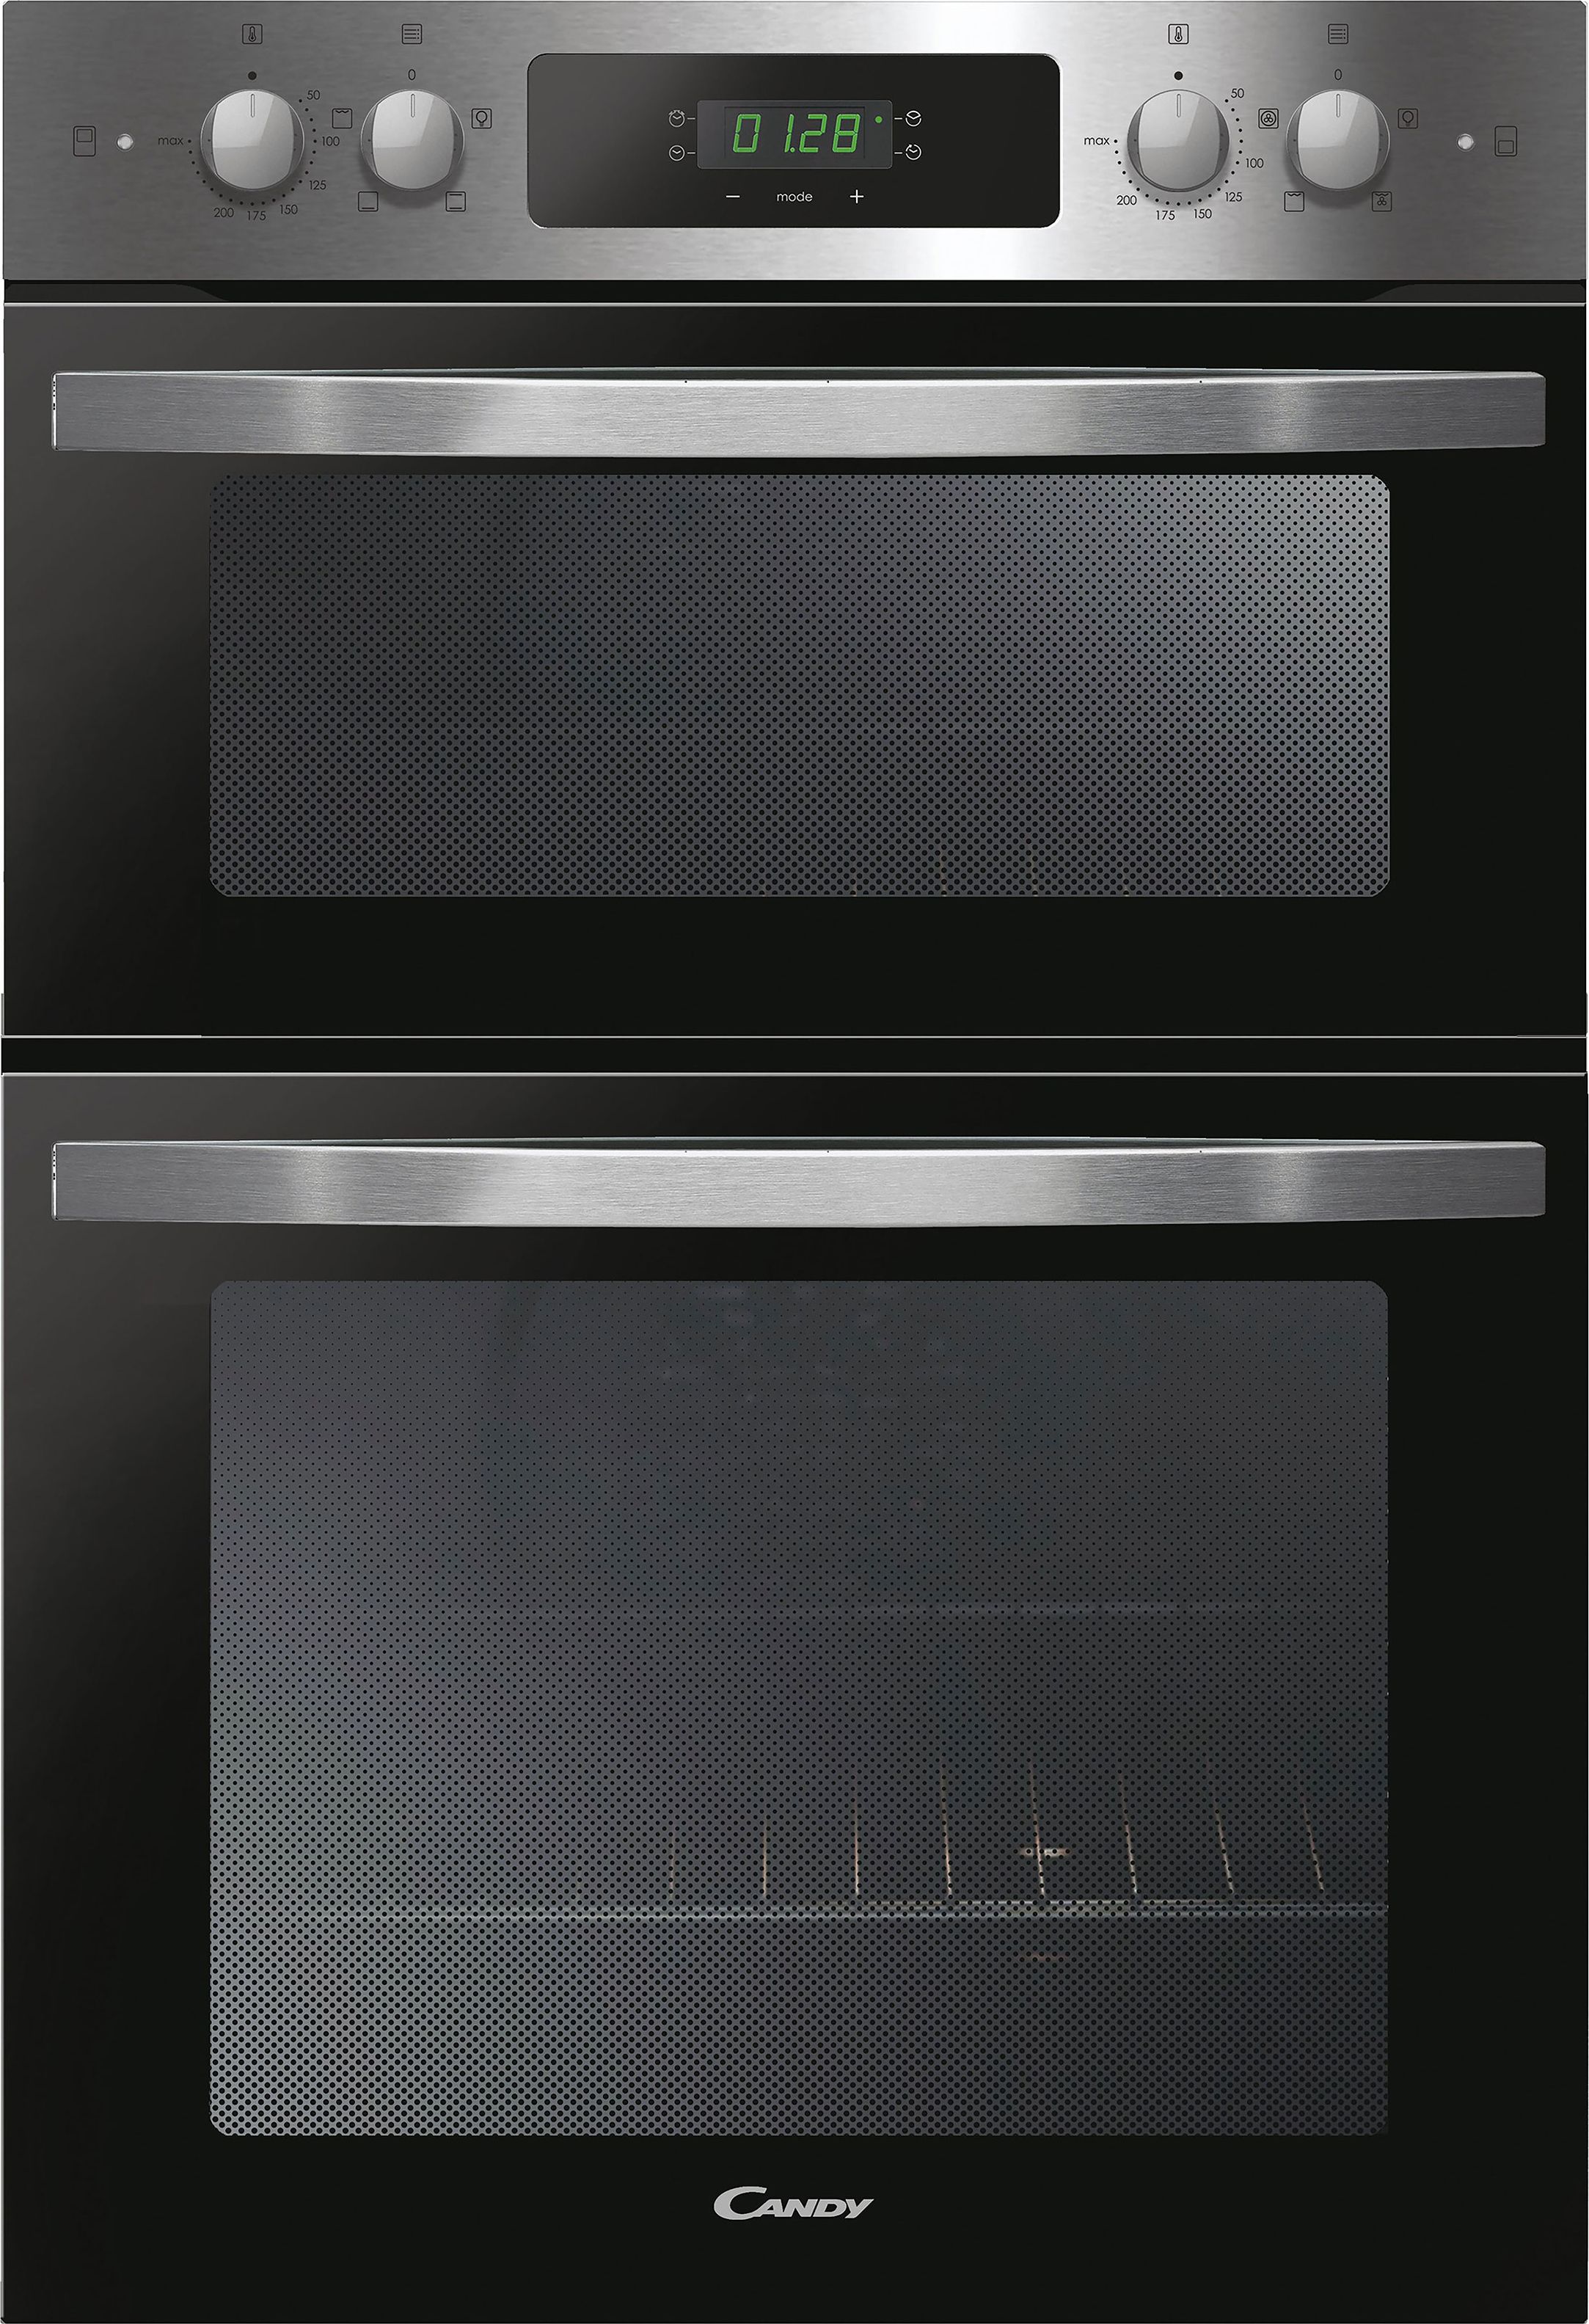 Candy Idea FCI9D405X Built In Electric Double Oven - Stainless Steel - A/A Rated, Stainless Steel